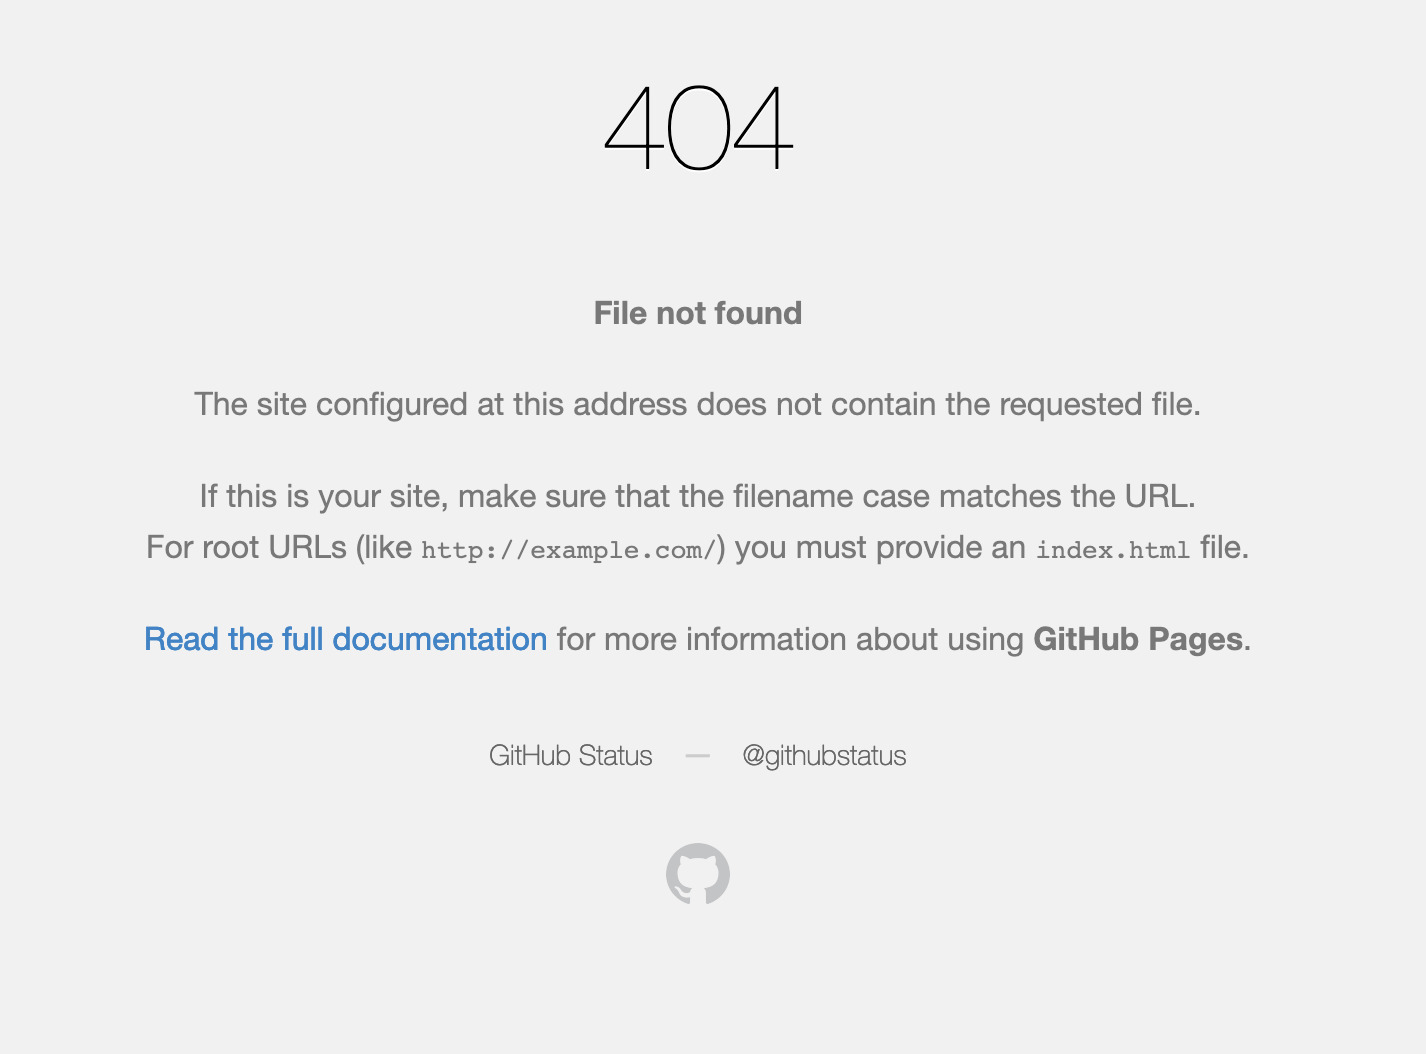 GitHub pages 404